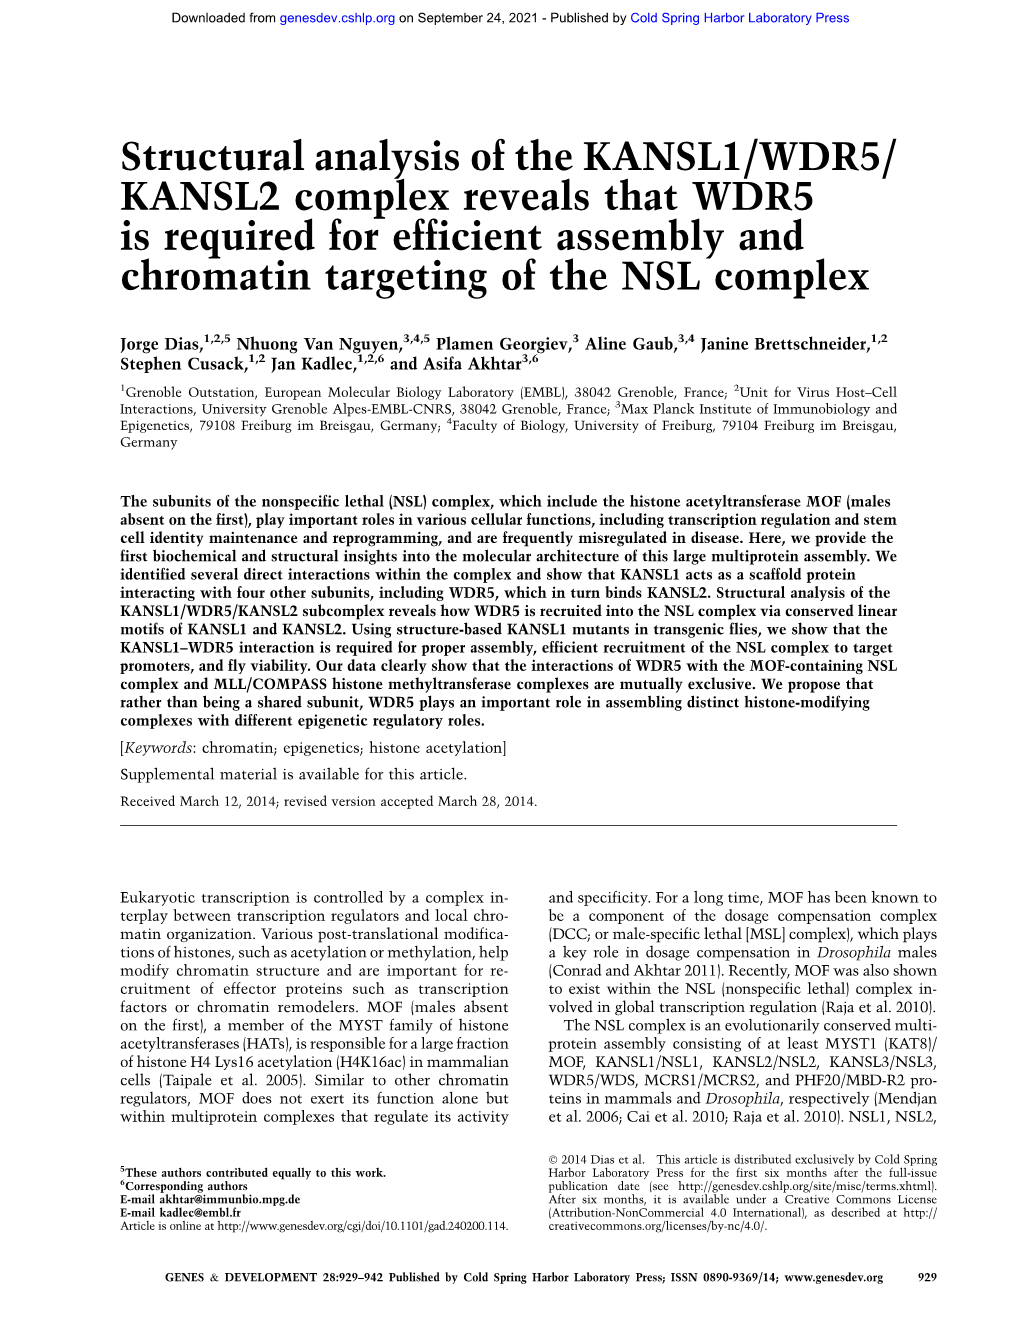 Structural Analysis of the KANSL1/WDR5/ KANSL2 Complex Reveals That WDR5 Is Required for Efficient Assembly and Chromatin Targeting of the NSL Complex